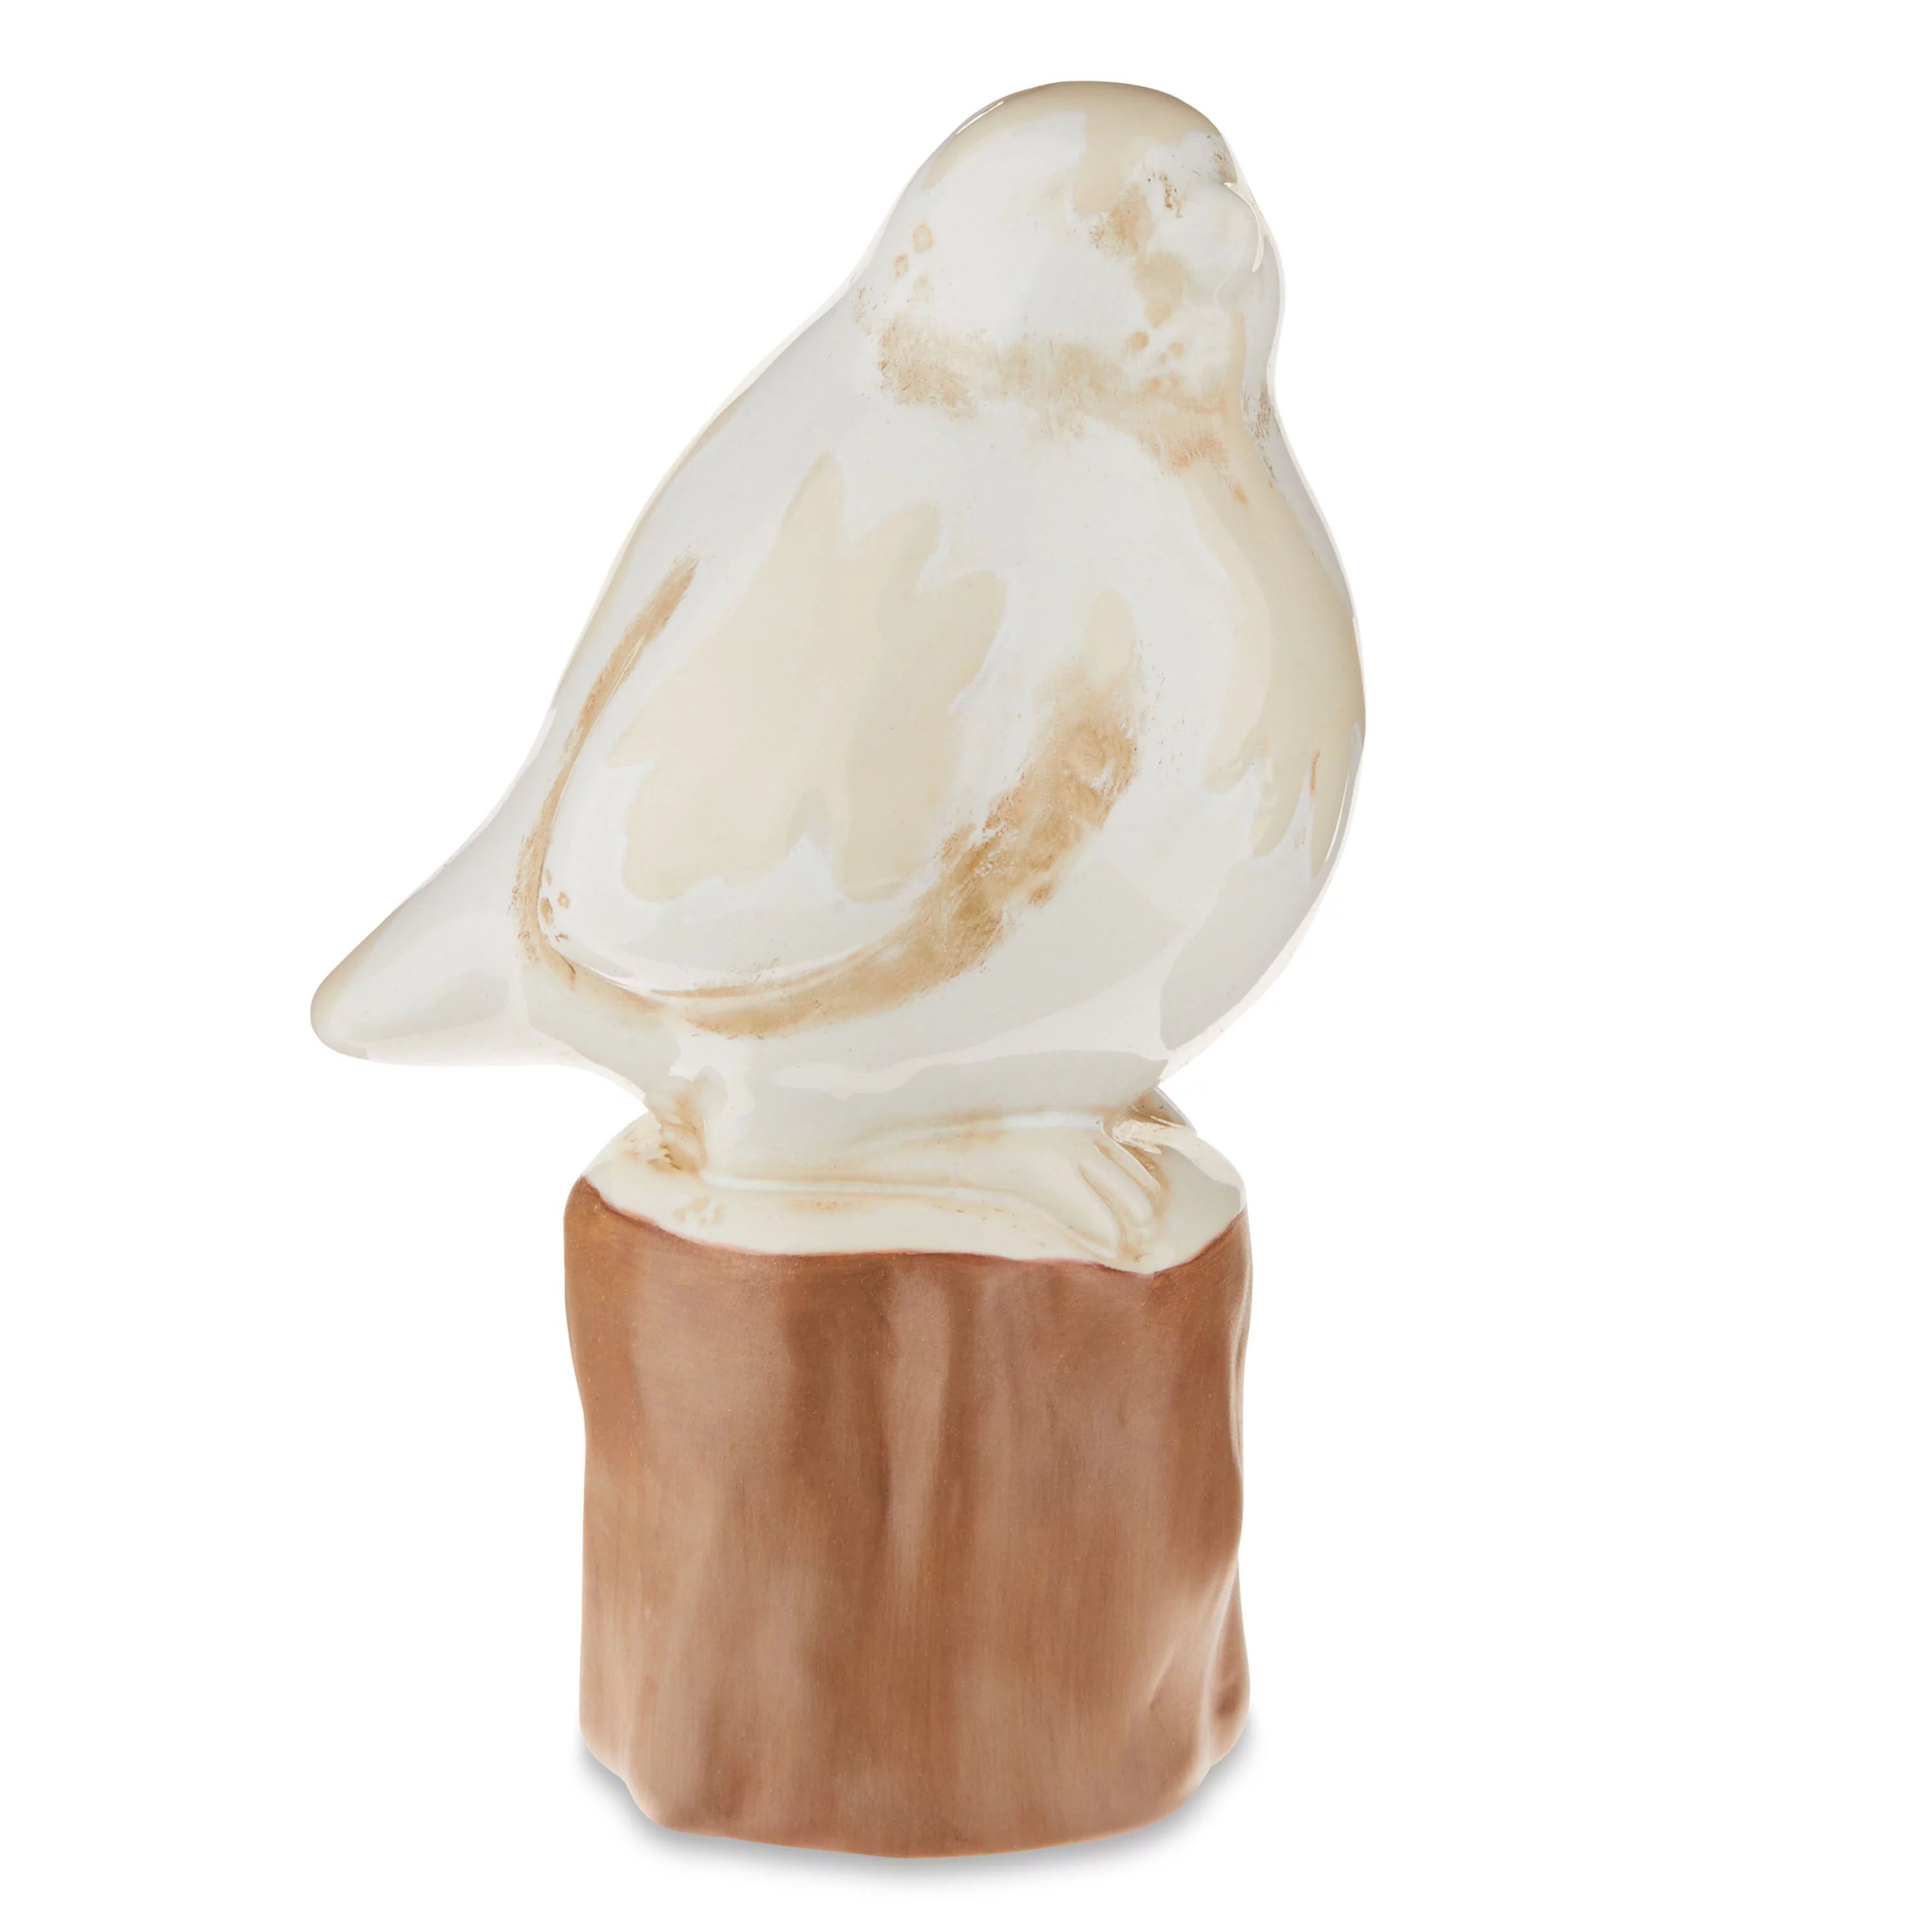 Holiday Time White Antique Ceramic Bird on Stand Table Decoration, 3.875" x 2.75" x 5.625" | Walmart (US)